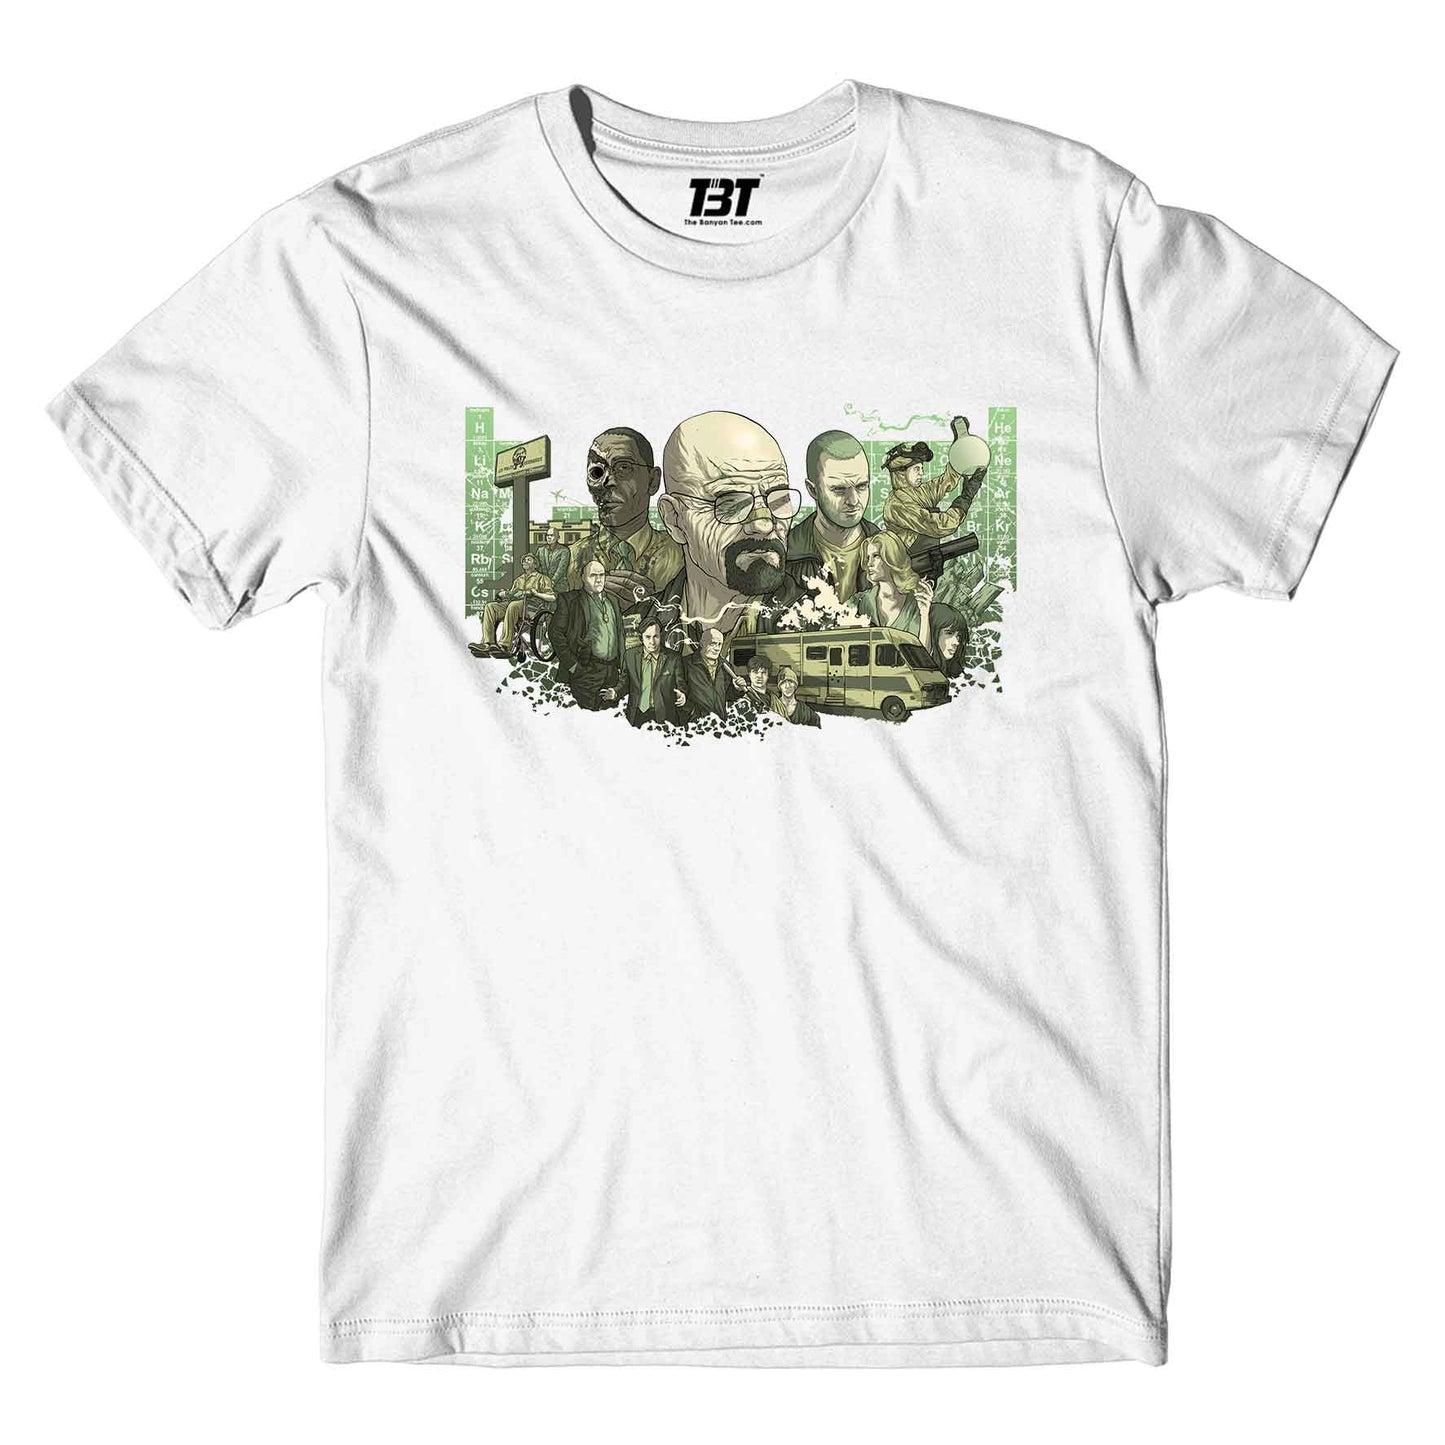 the banyan tee merch on sale Breaking Bad T shirt - On Sale - 6XL (Chest size 56 IN)